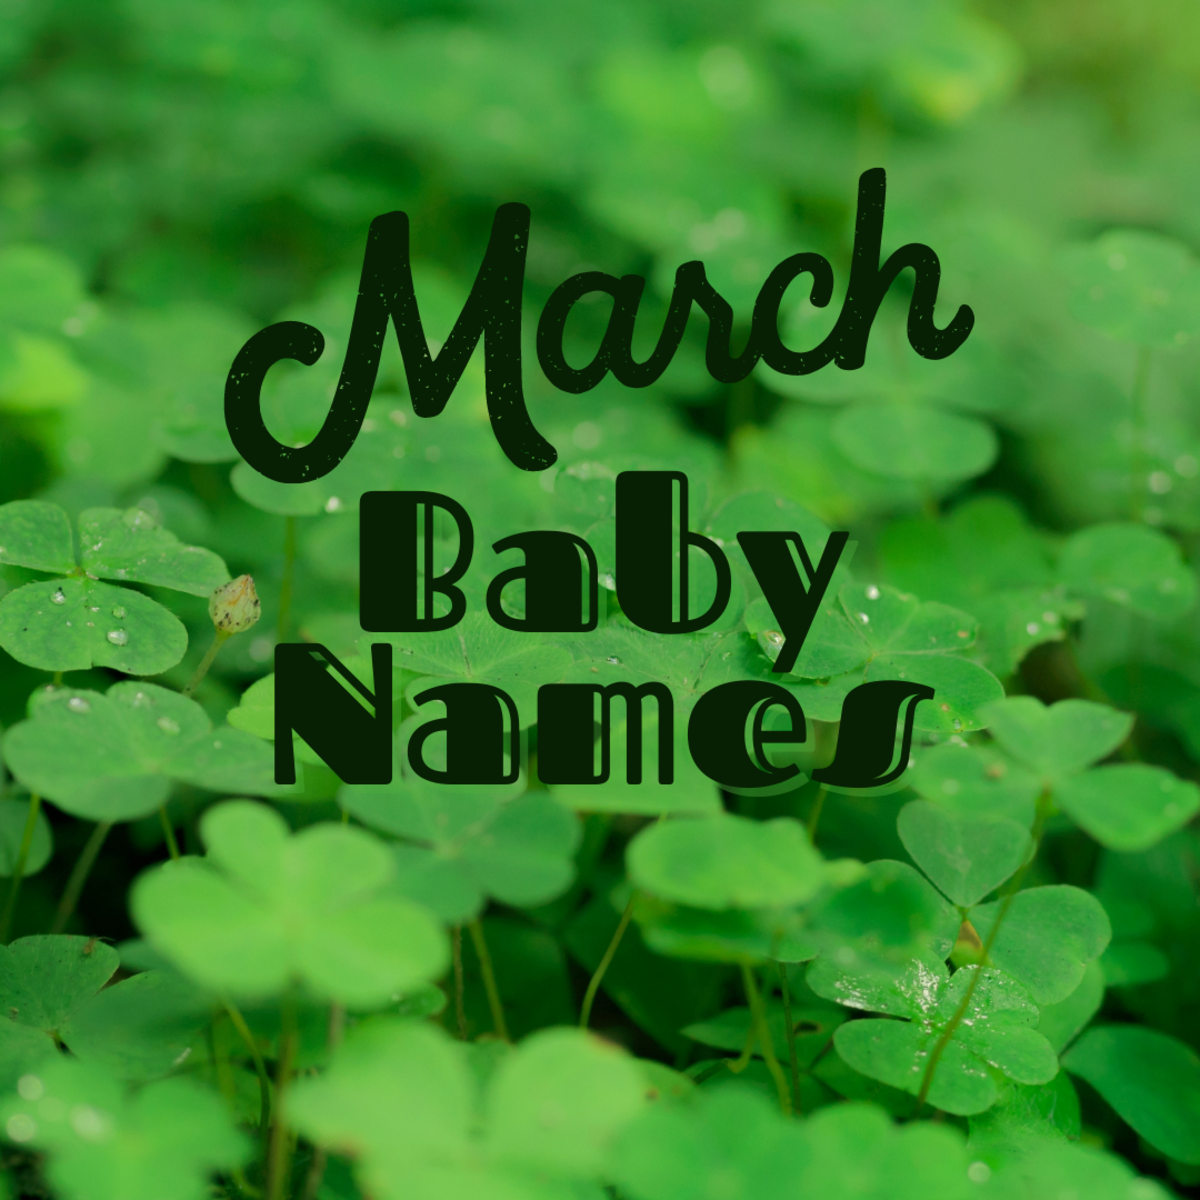 30 name ideas for babies born in the month of March